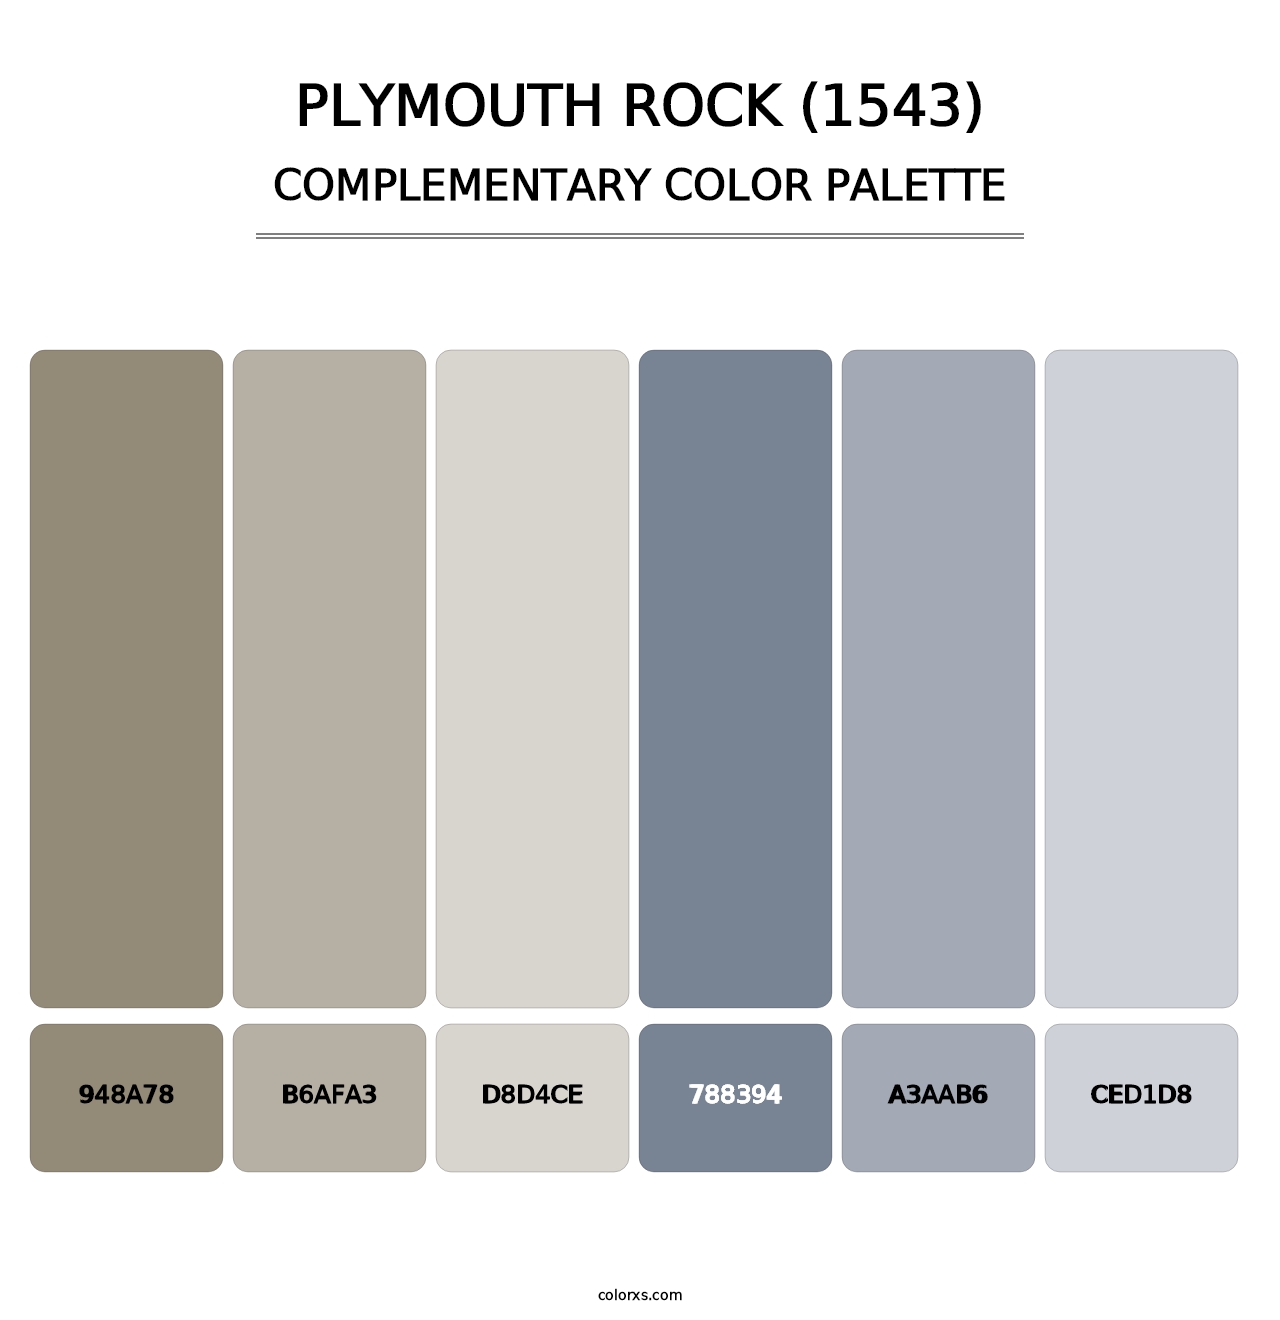 Plymouth Rock (1543) - Complementary Color Palette